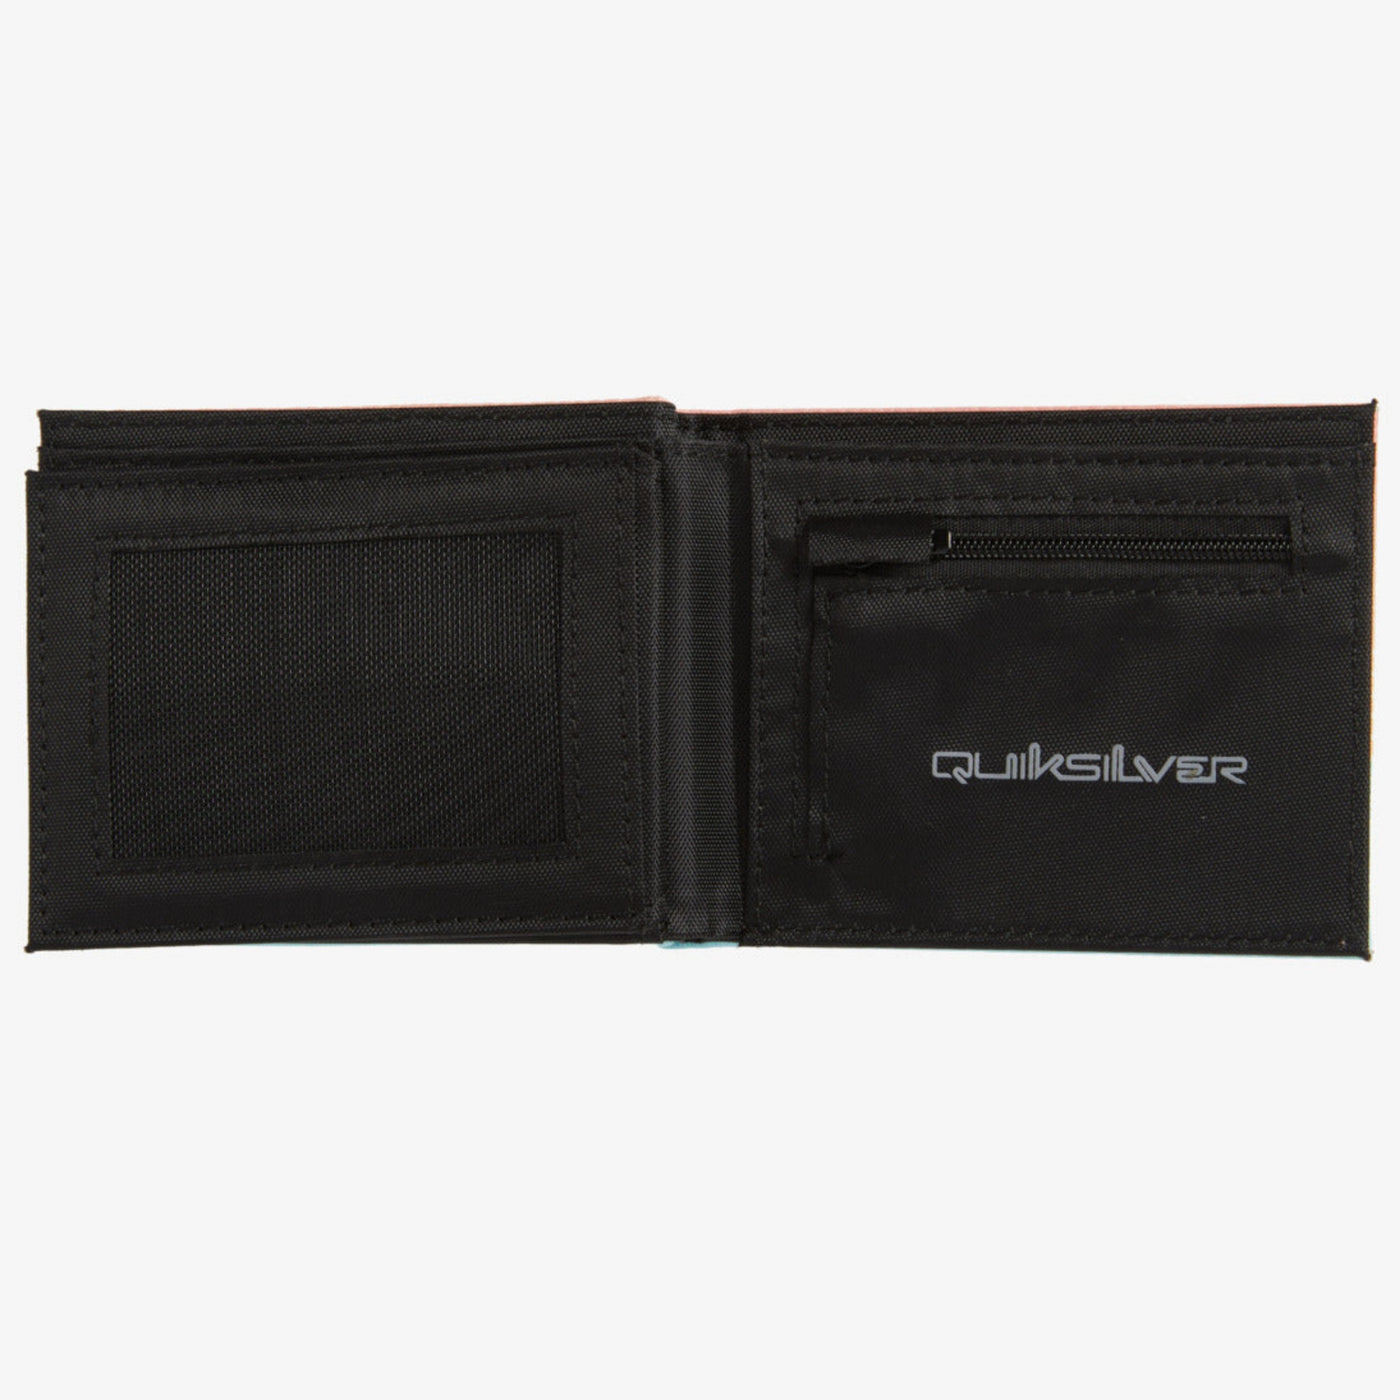 Quiksilver Freshness Tri-Fold Wallet - Fiery Coral